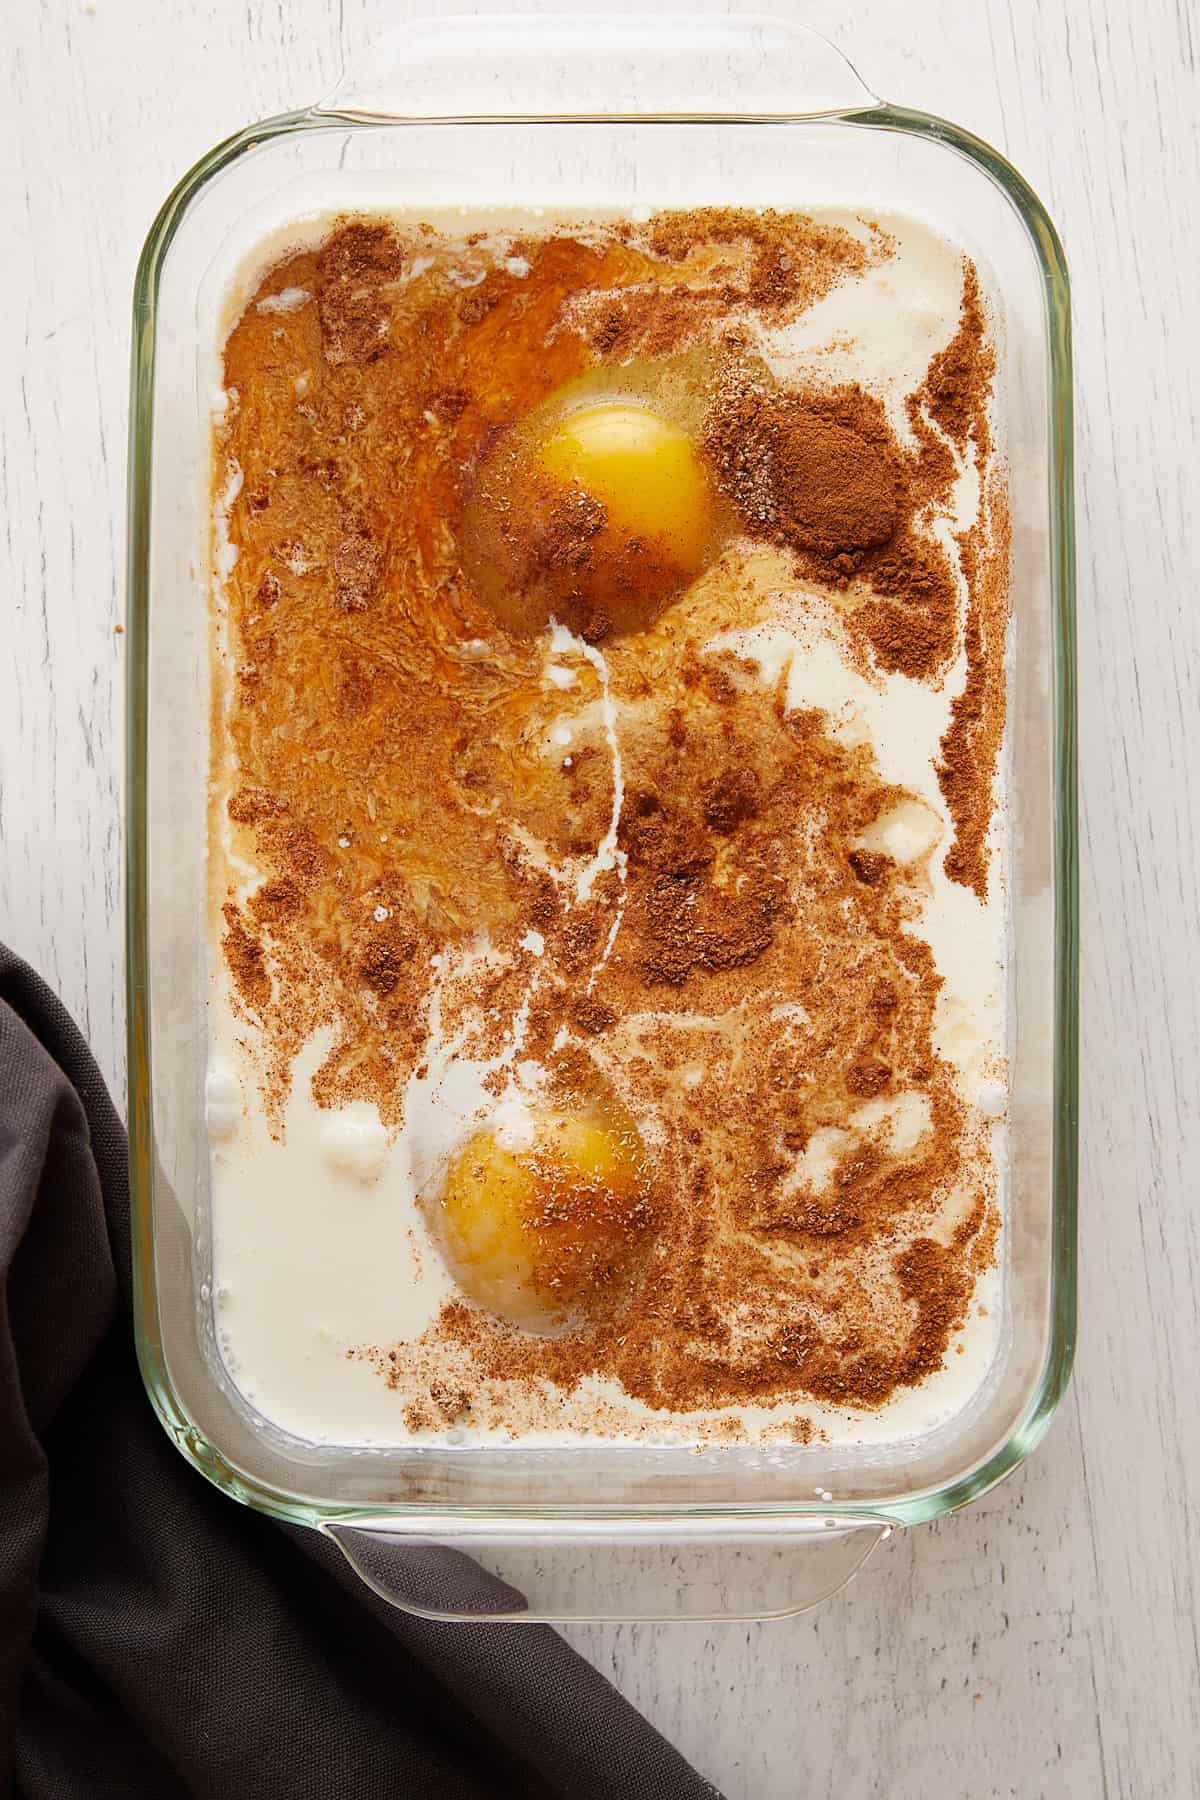 Overhead view of eggs, cinnamon, and cream in a glass pan